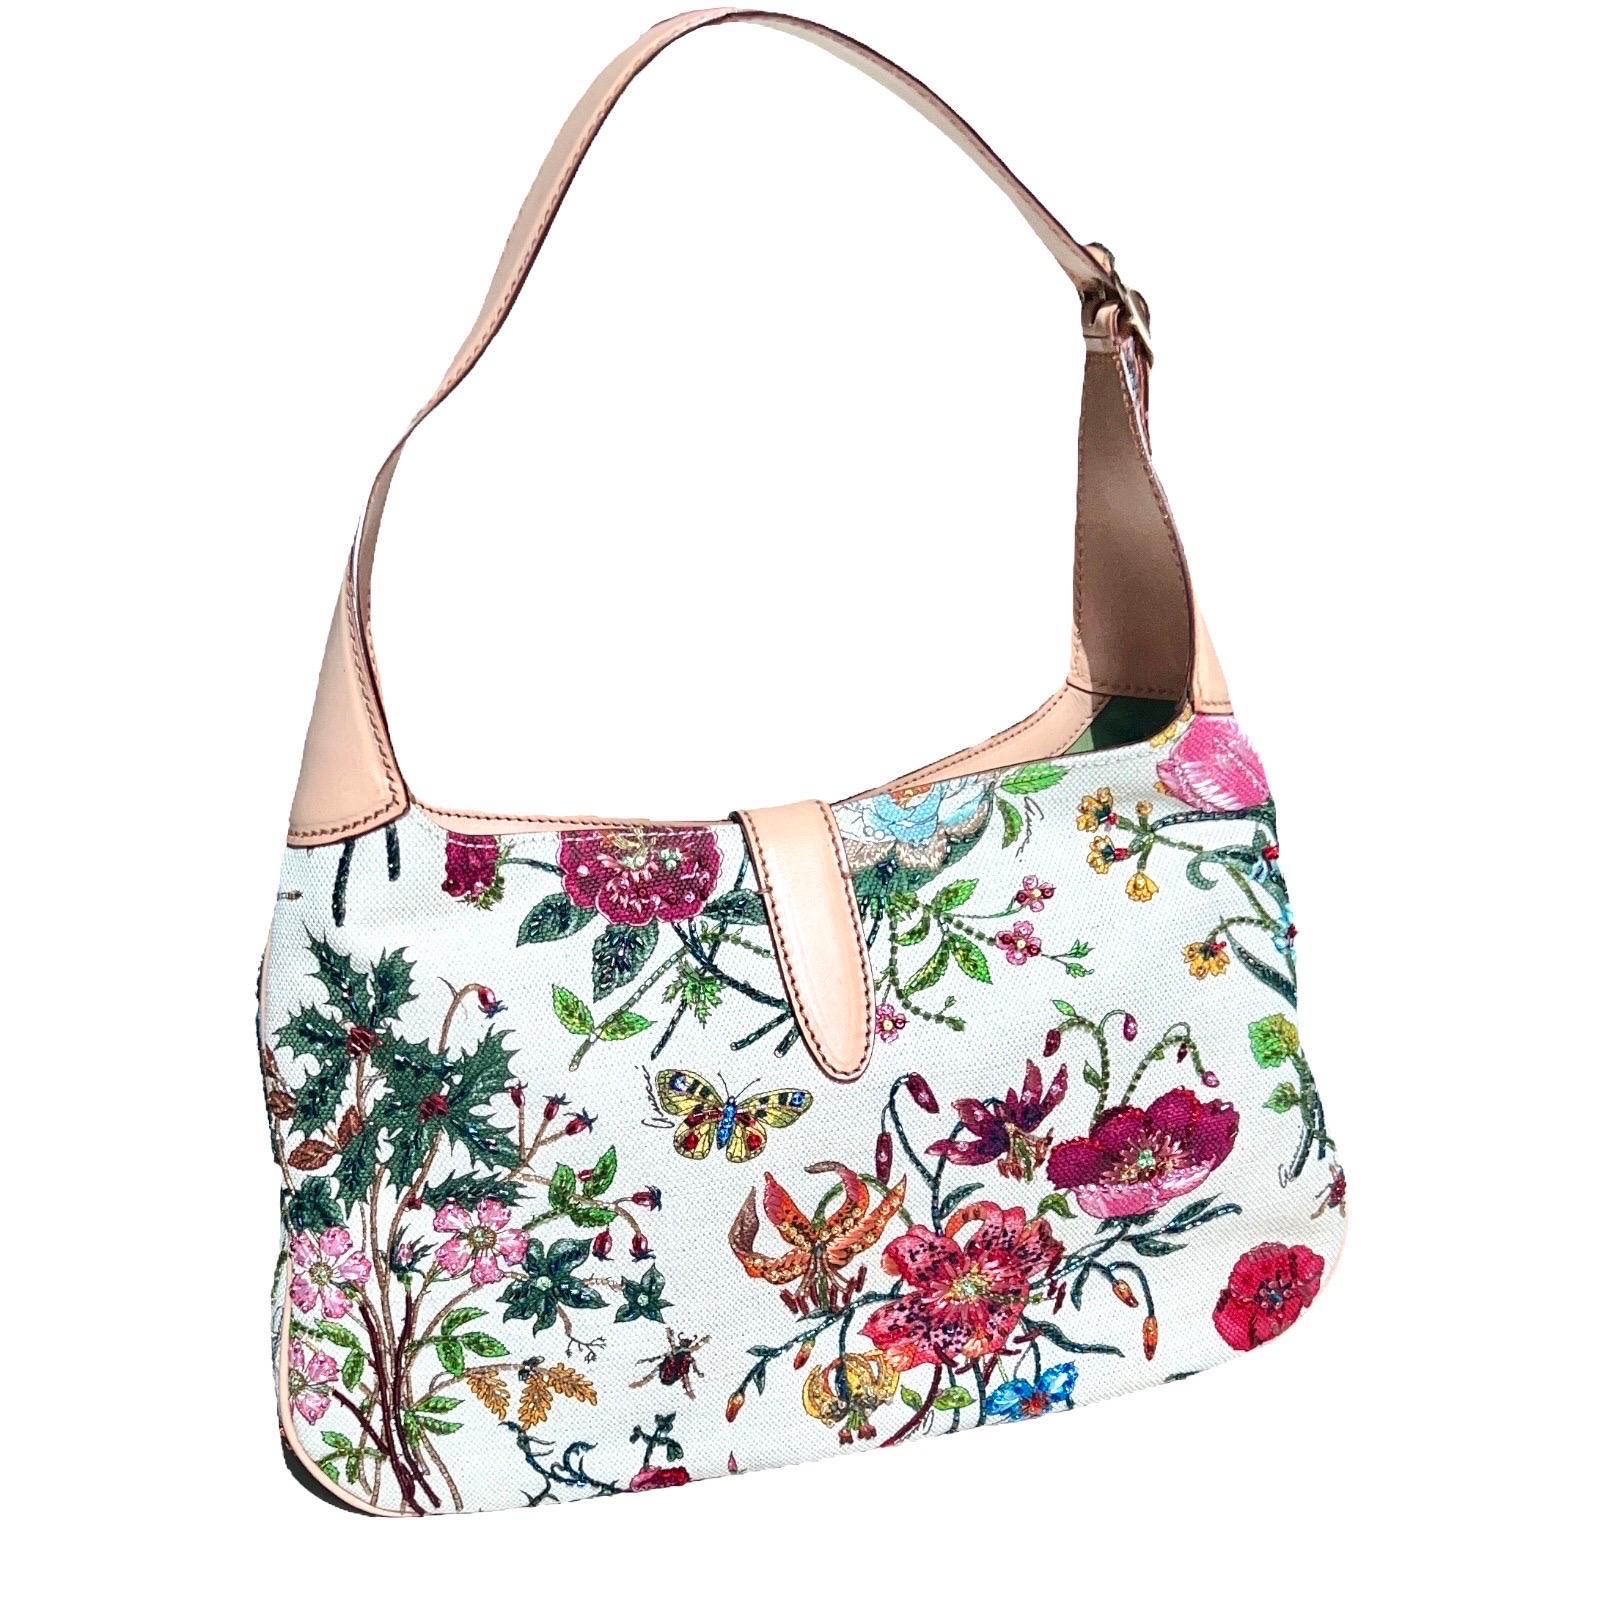 EXTREMELY RARE

GUCCI FLORAL FLORA BEADED SIGNATURE BAG

LIMITED EDITON - ONLY VERY FEW PIECES WERE PRODUCED OF THIS GORGEOUS BAG AND SOLD IN FLAGSHIP STORES TO A SELECTED CLIENTELE

DETAILS: 

A GUCCI signature piece that will last you for many